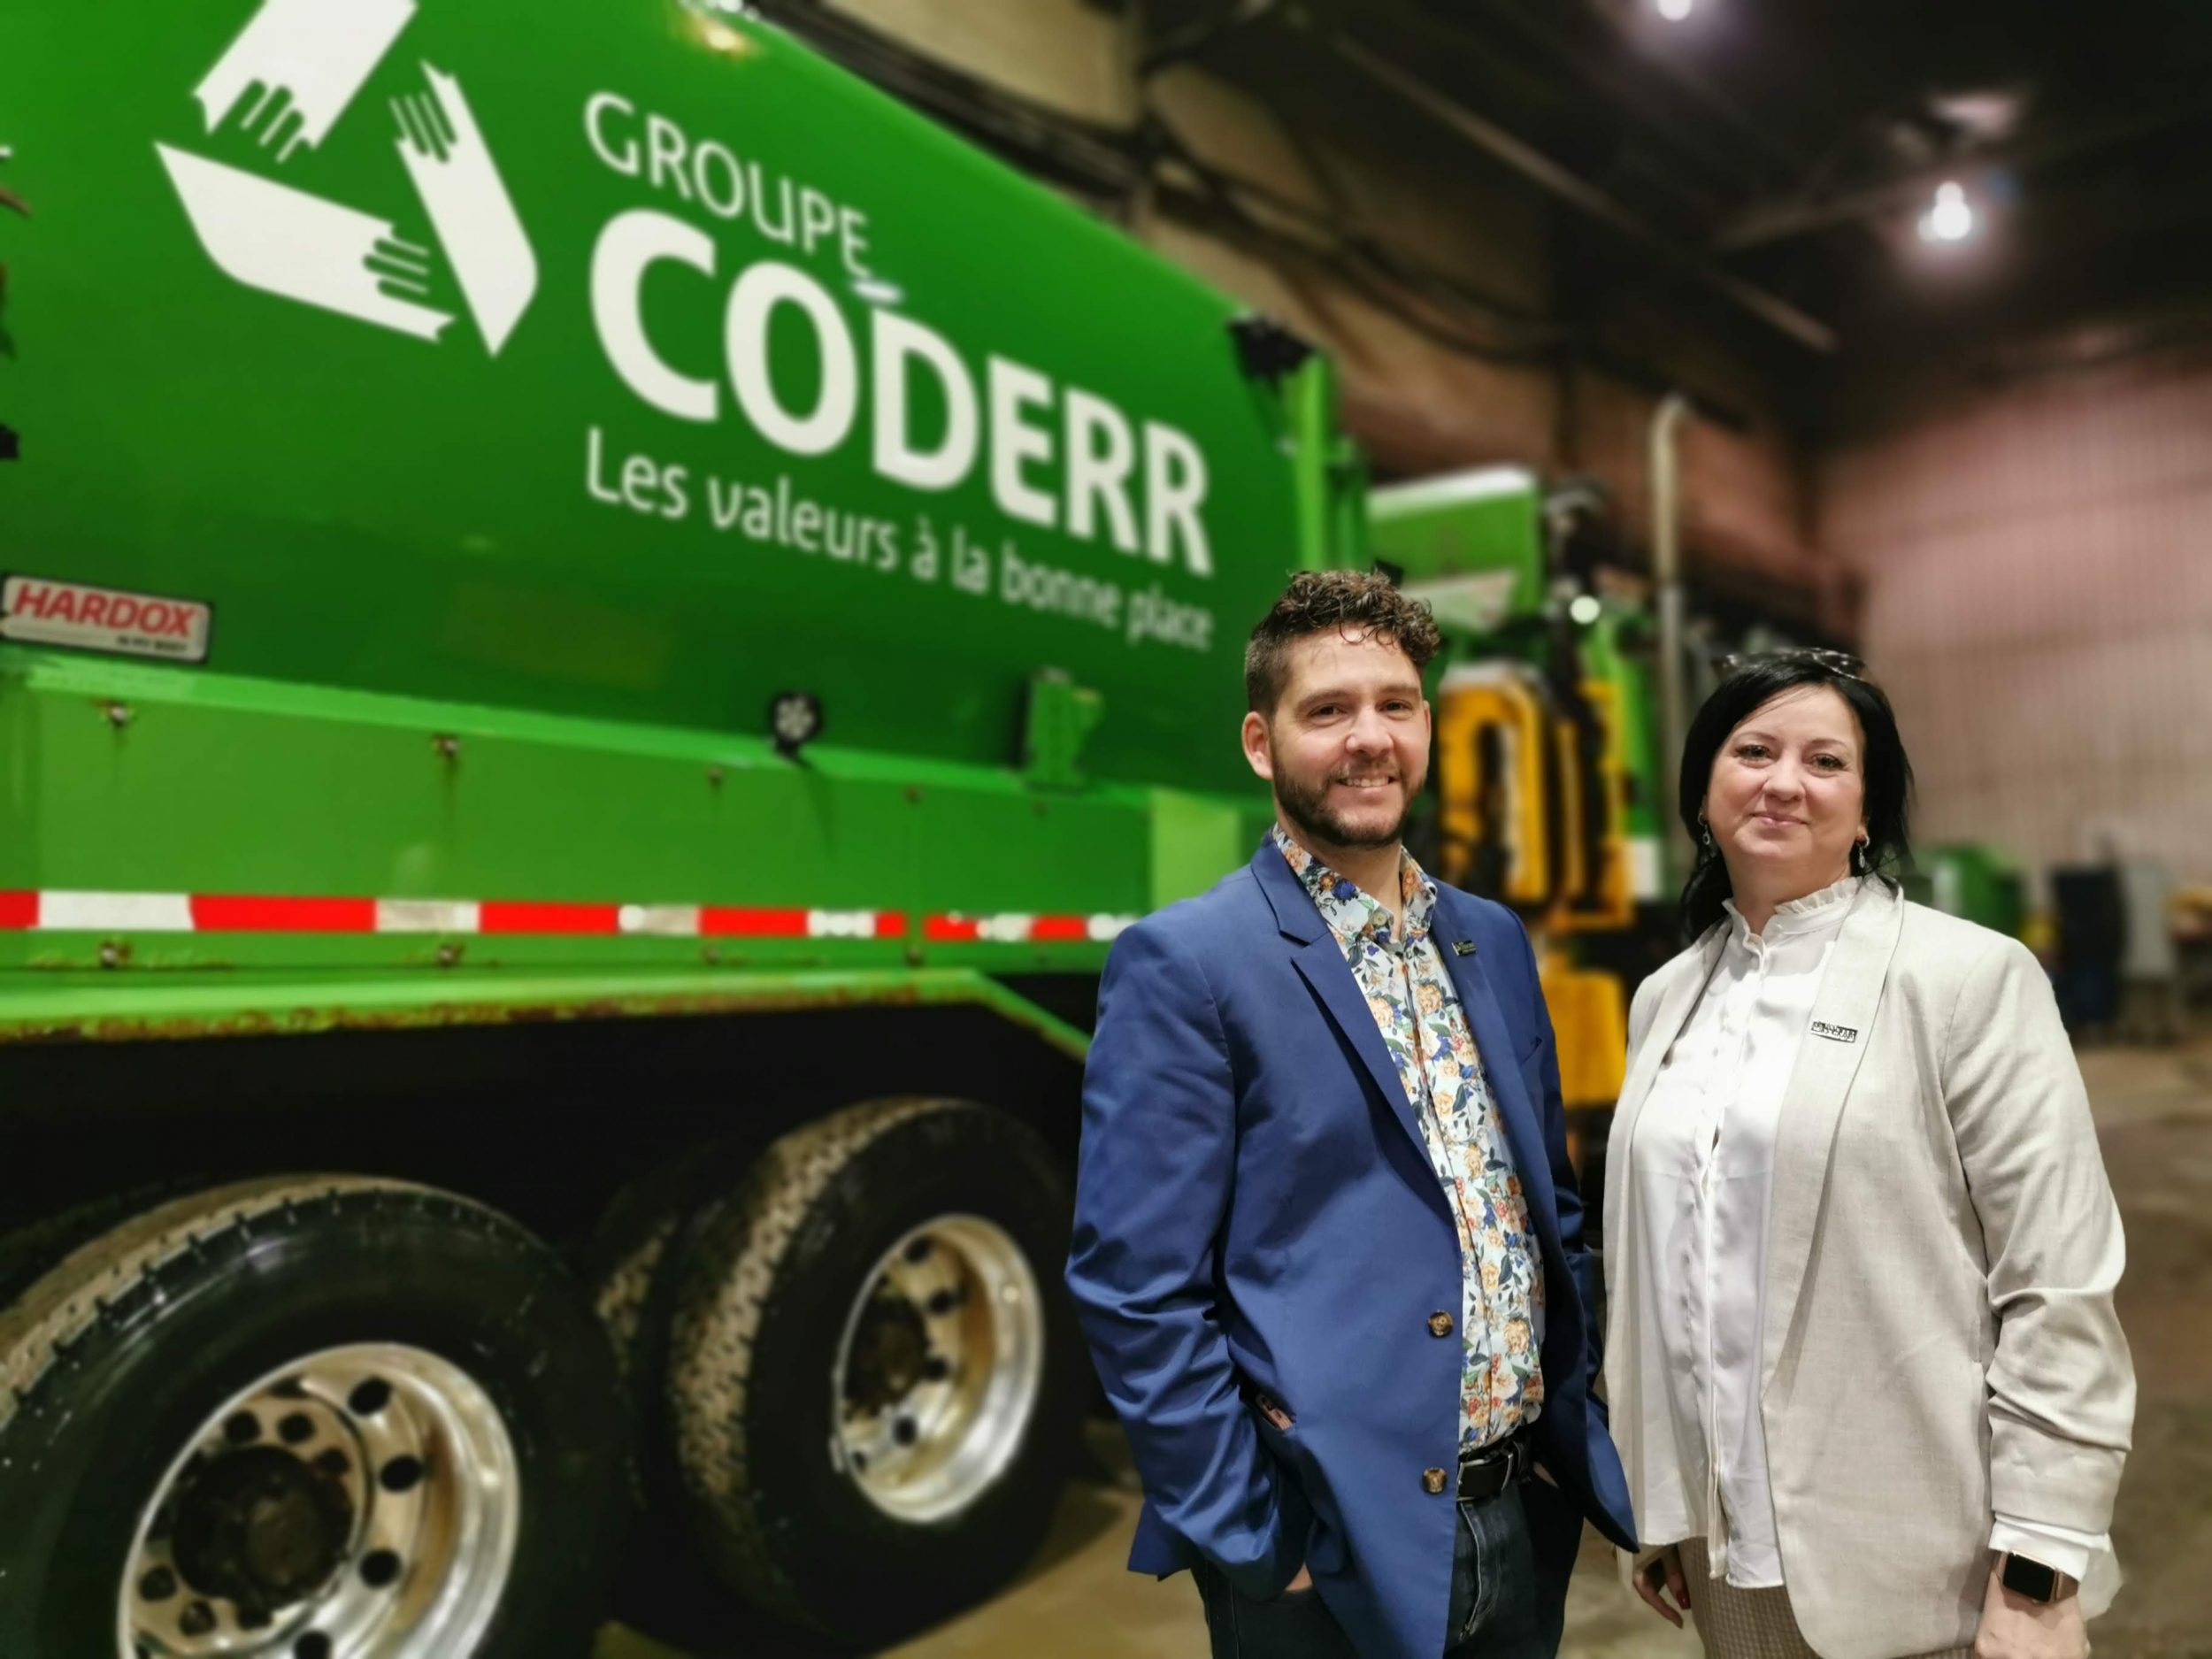 Coderr groupe david gosselin camion recyclage